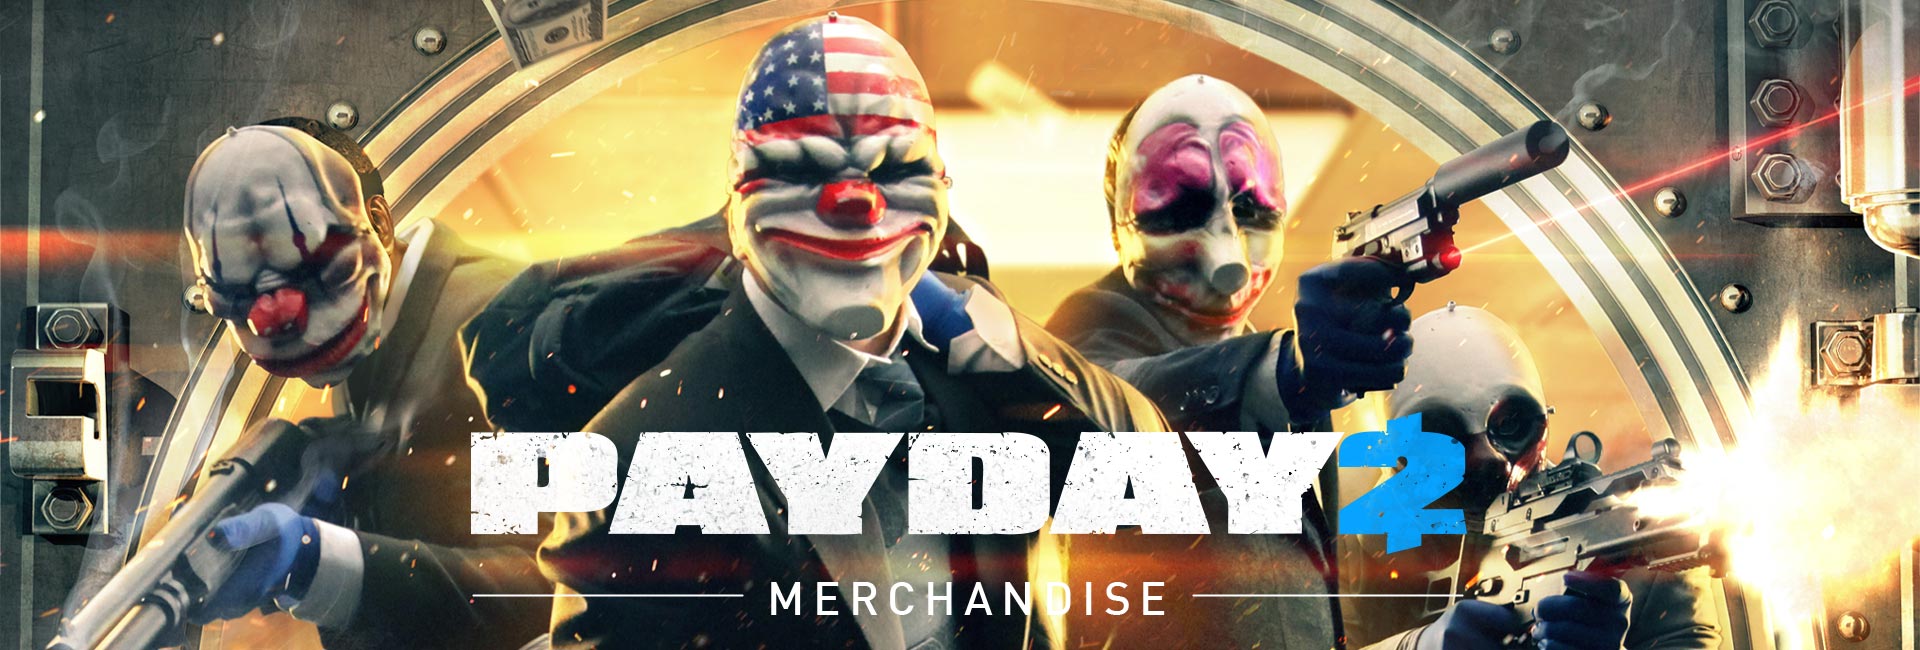 payday 2 store